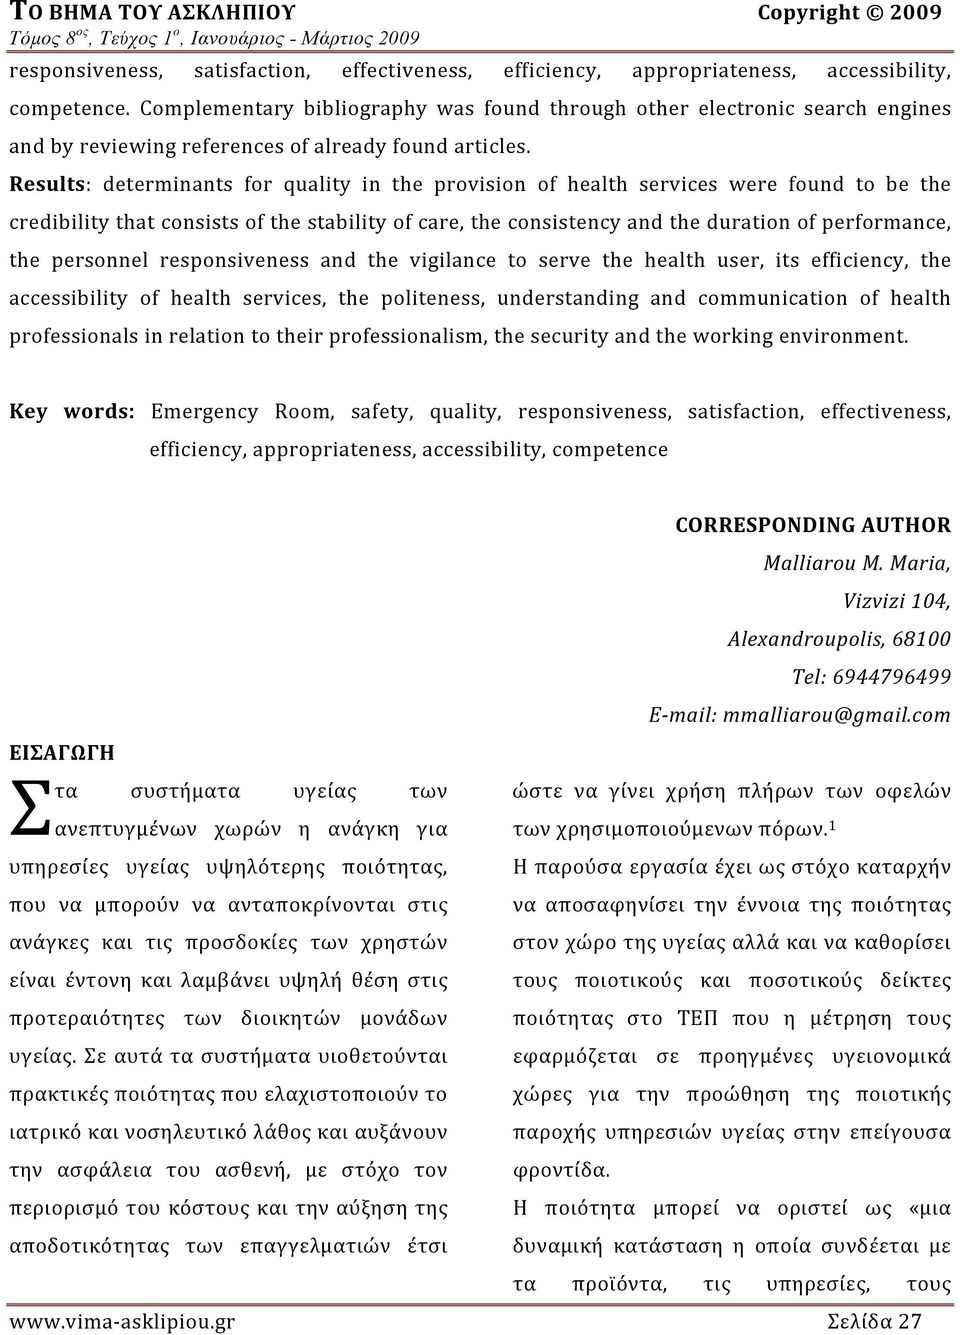 Results: determinants for quality in the provision of health services were found to be the credibility that consists of the stability of care, the consistency and the duration of performance, the